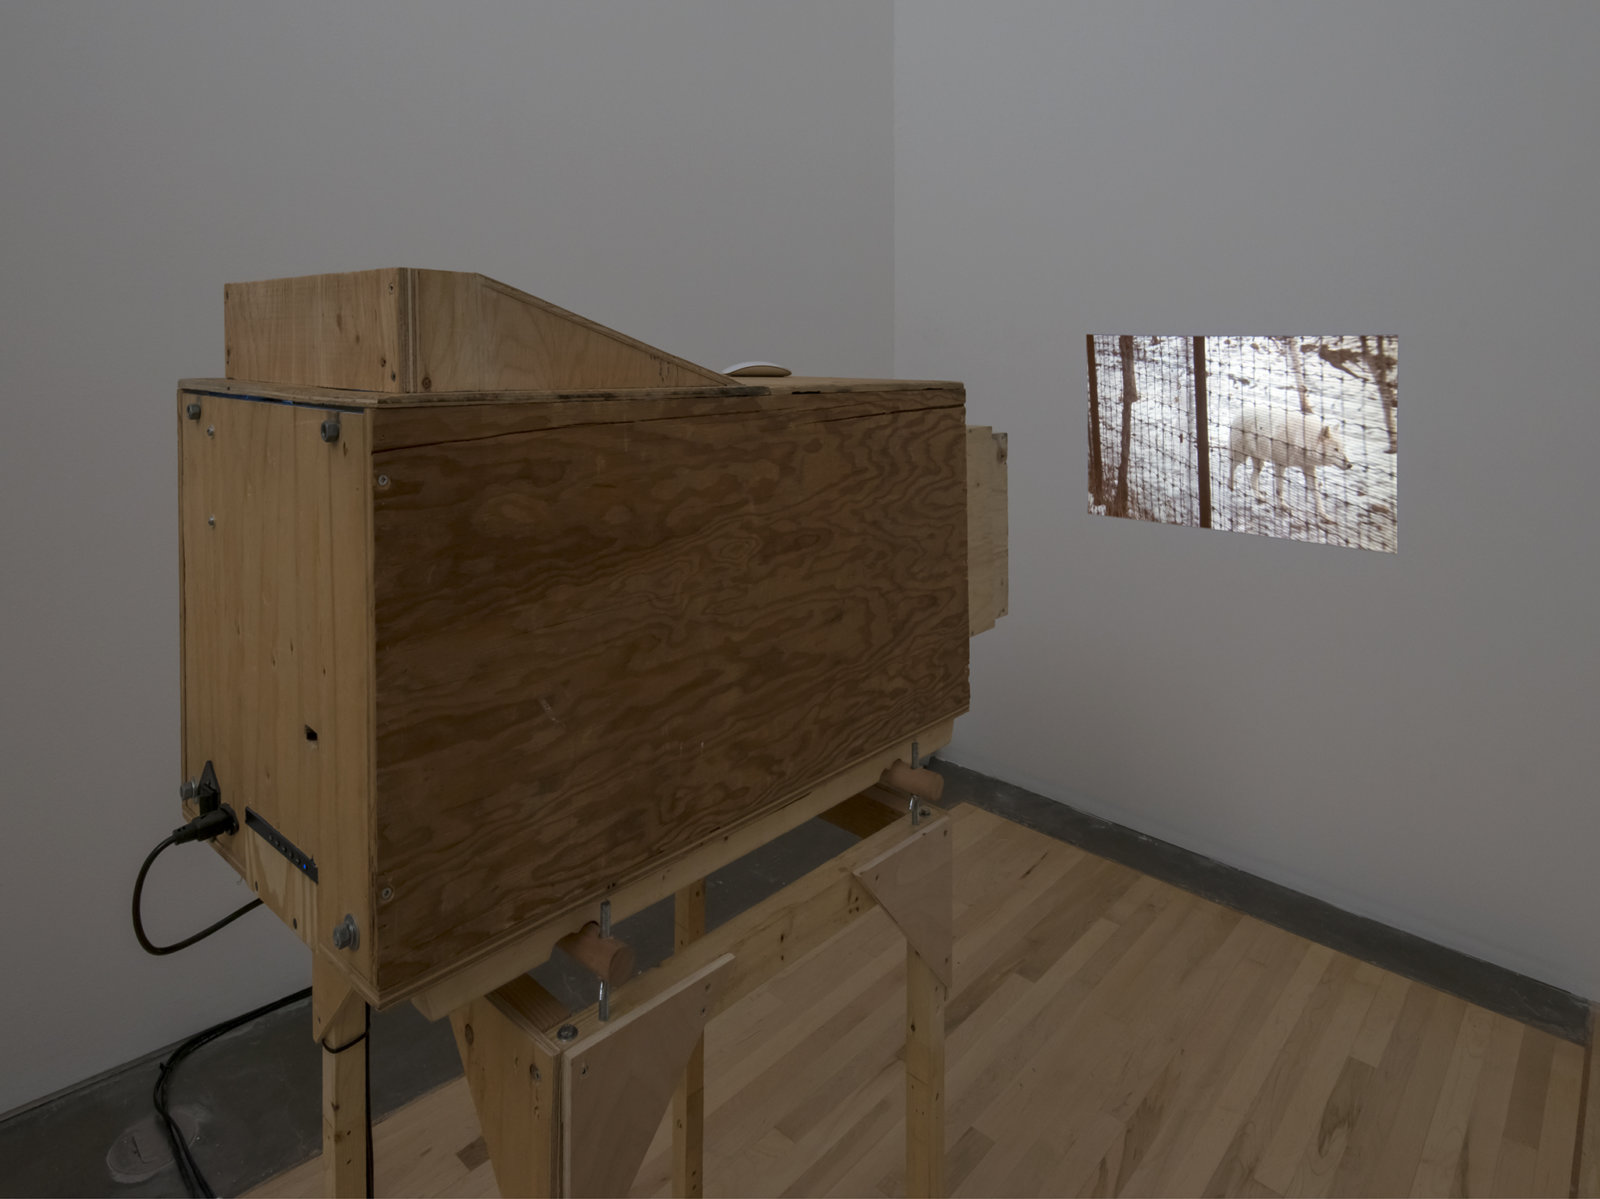 Kevin Schmidt, Sad Wolf, 2006, custom-made HD video projector, 48 x 24 x 48 in. (122 x 61 x 122 cm), HD video, 4 minutes, 11 seconds. Installation view, The Commons, Kamloops Art Gallery, Kamloops, Canada, 2015